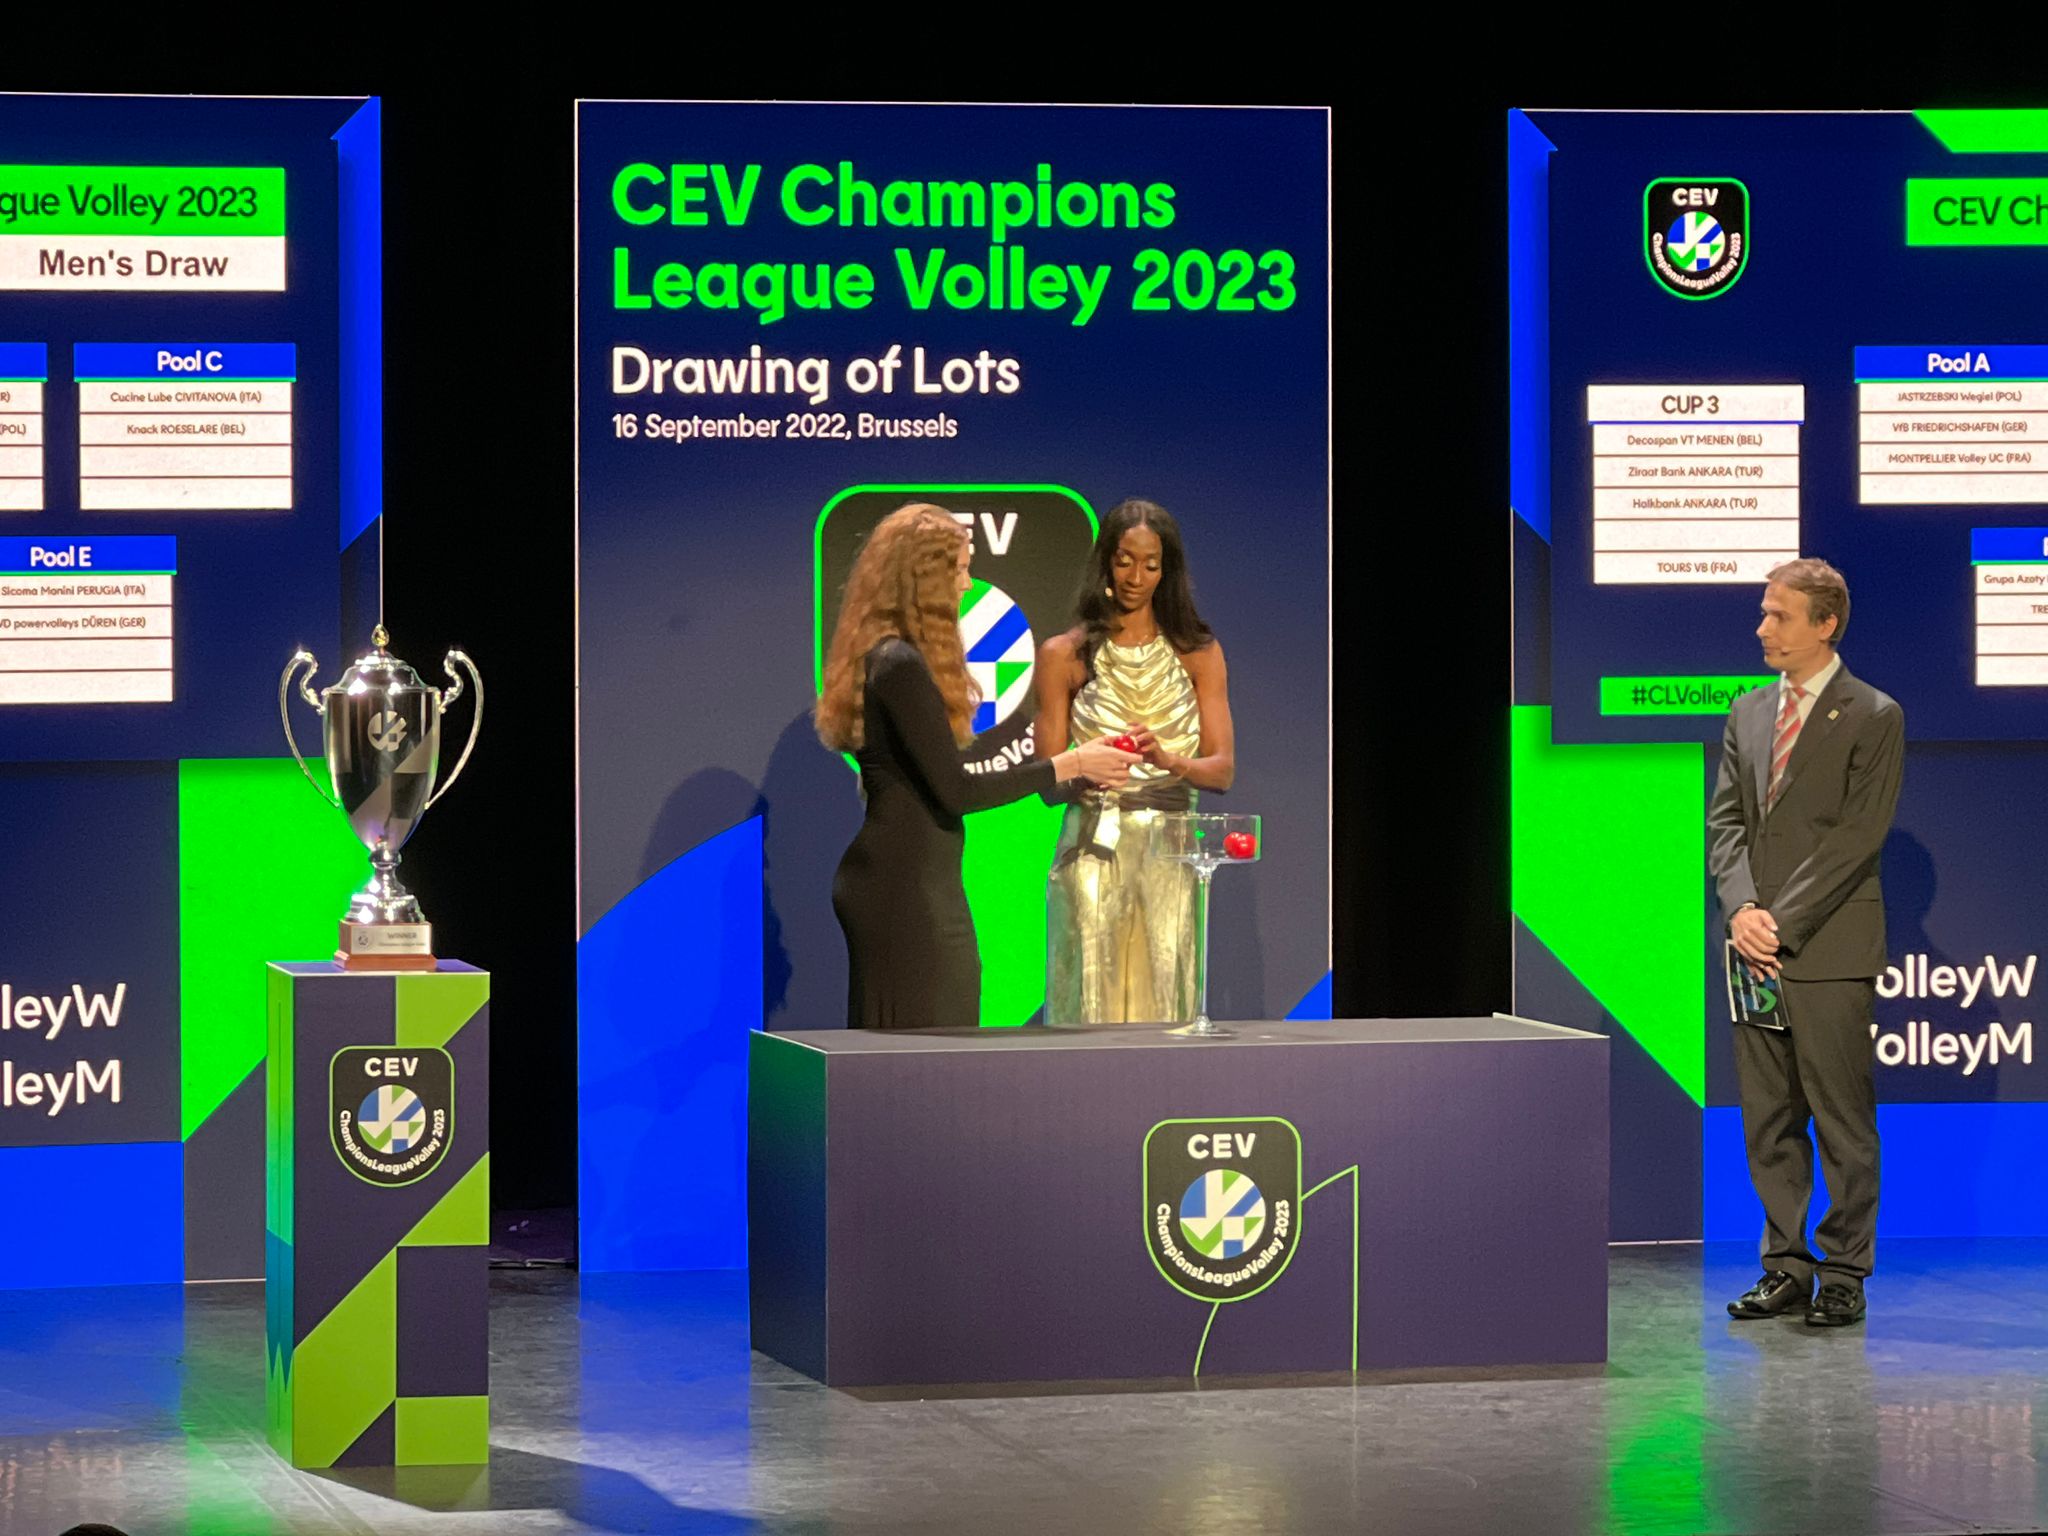 Champions League Volley 2023 ChampionsLeague